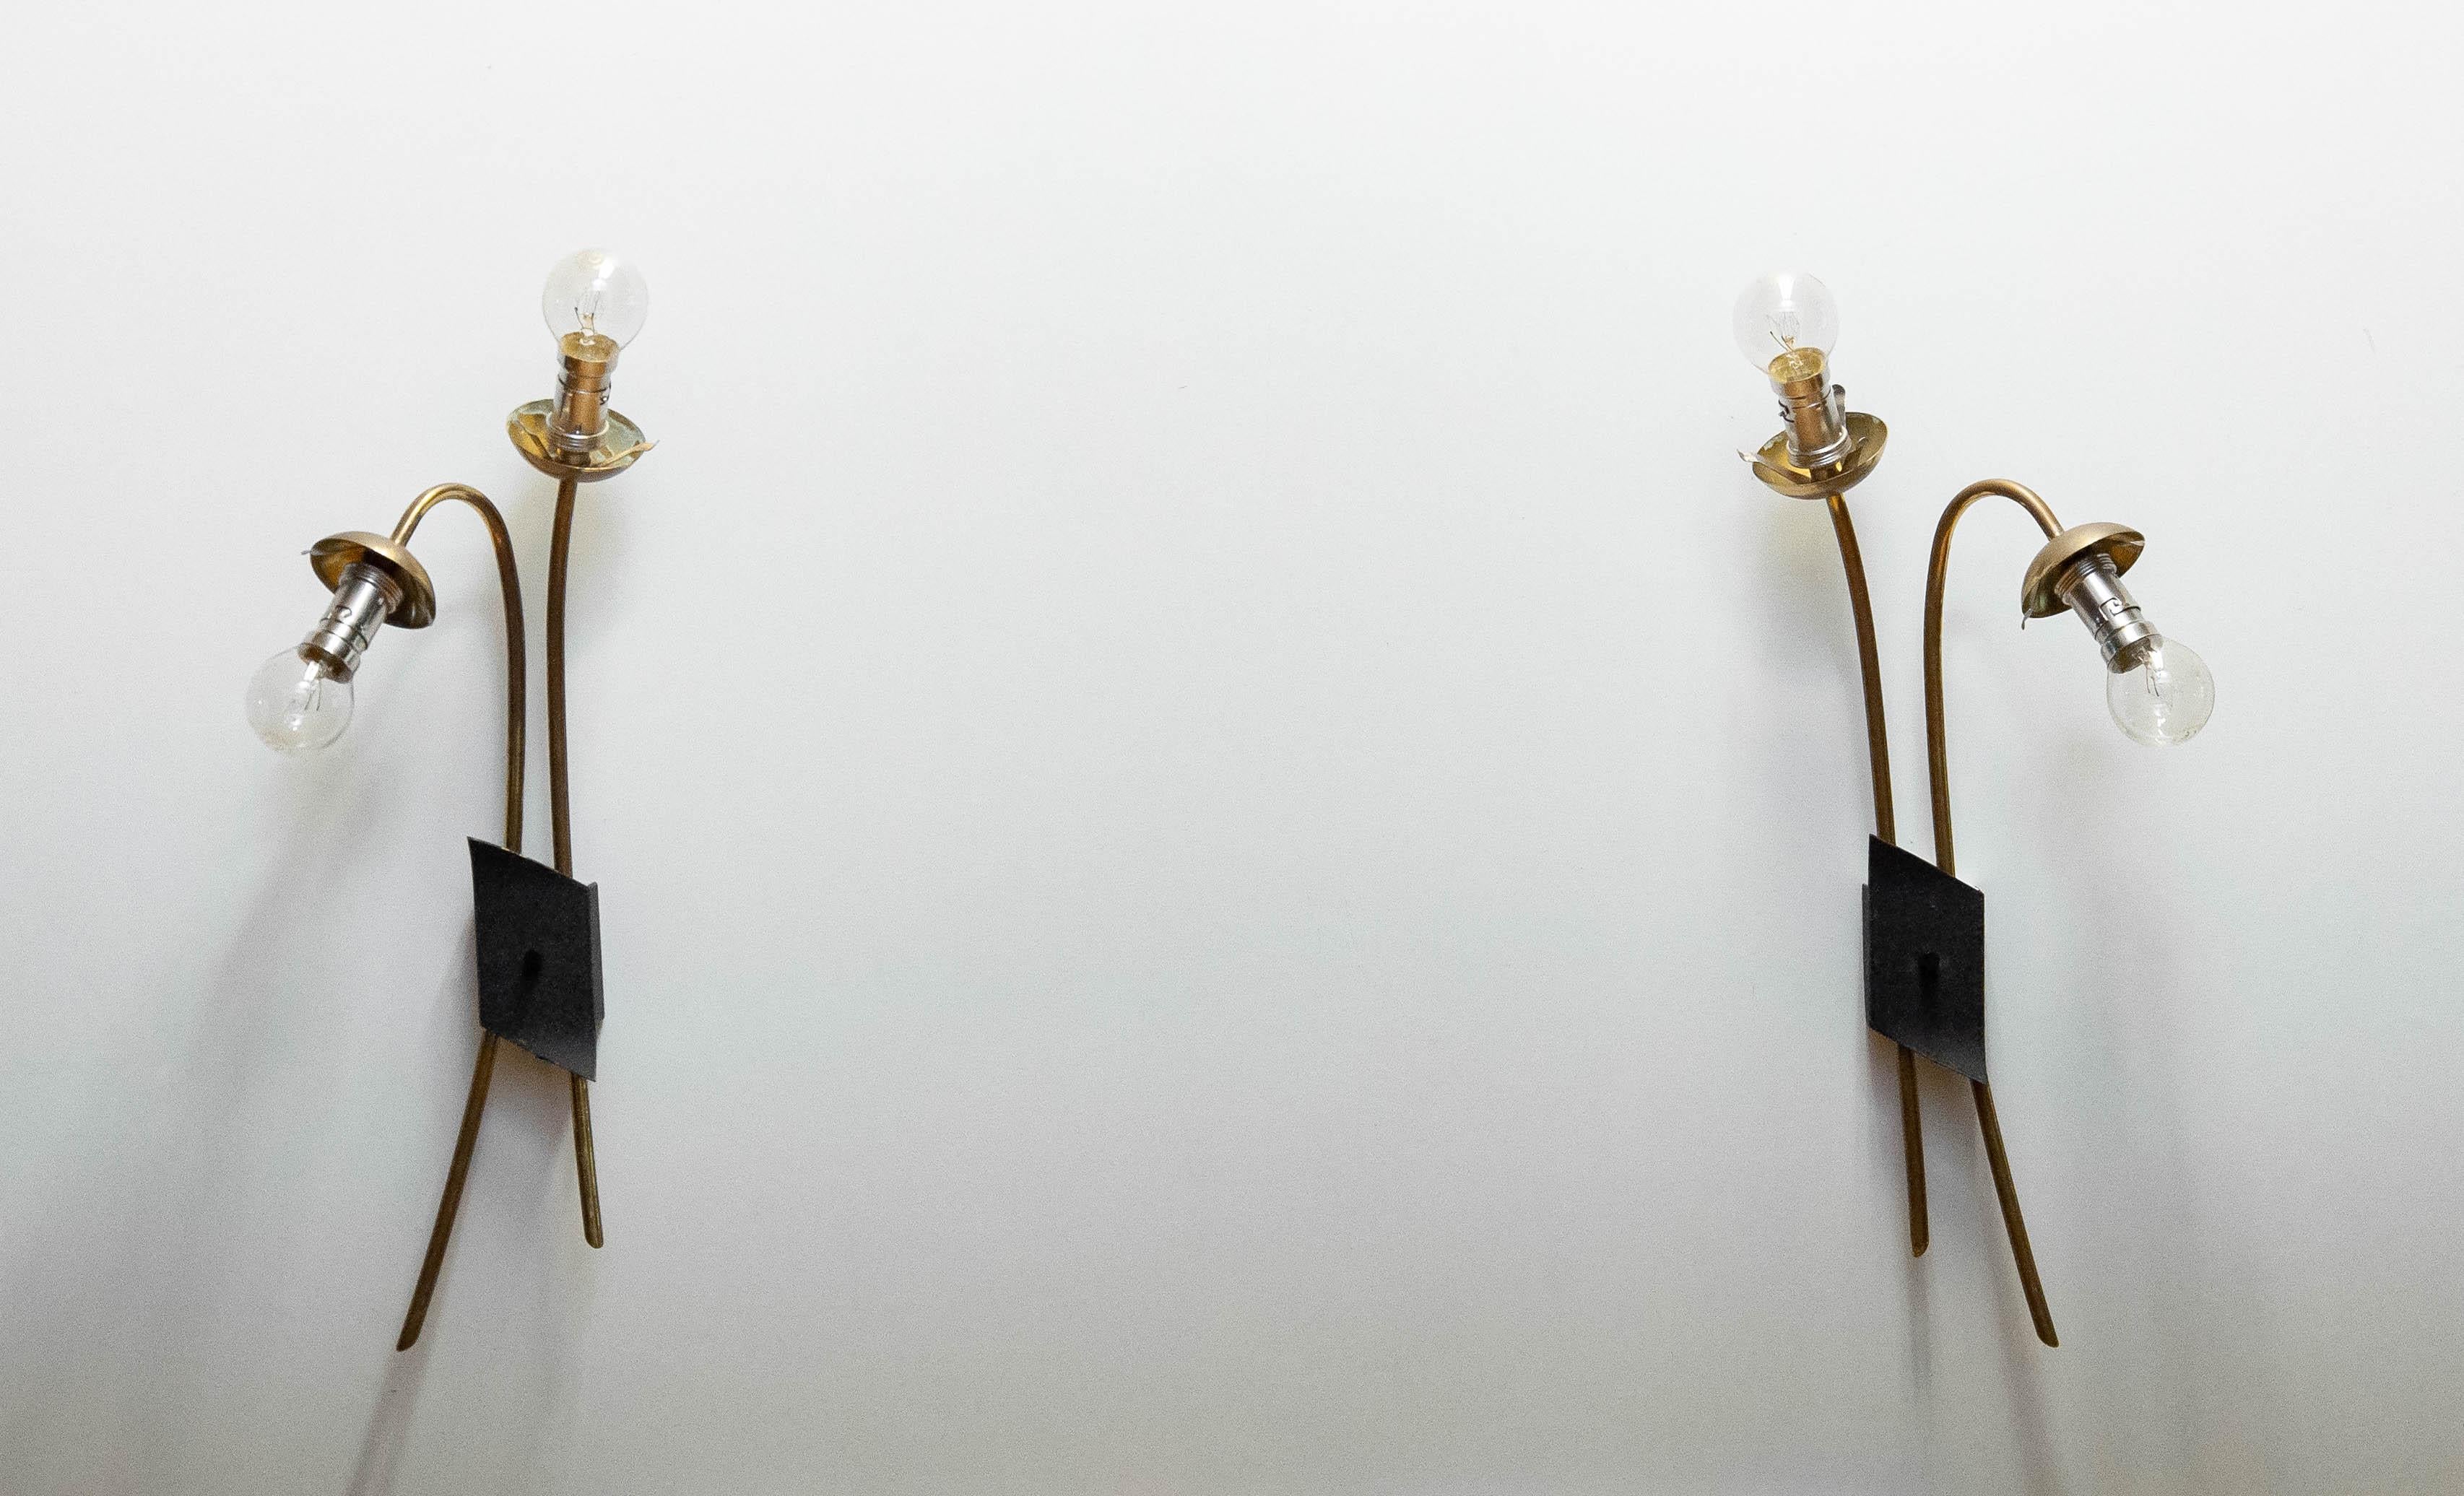 Pair French Brass And Opal Wall Lights / Sconces By Maison Lunel From The 1950s For Sale 6